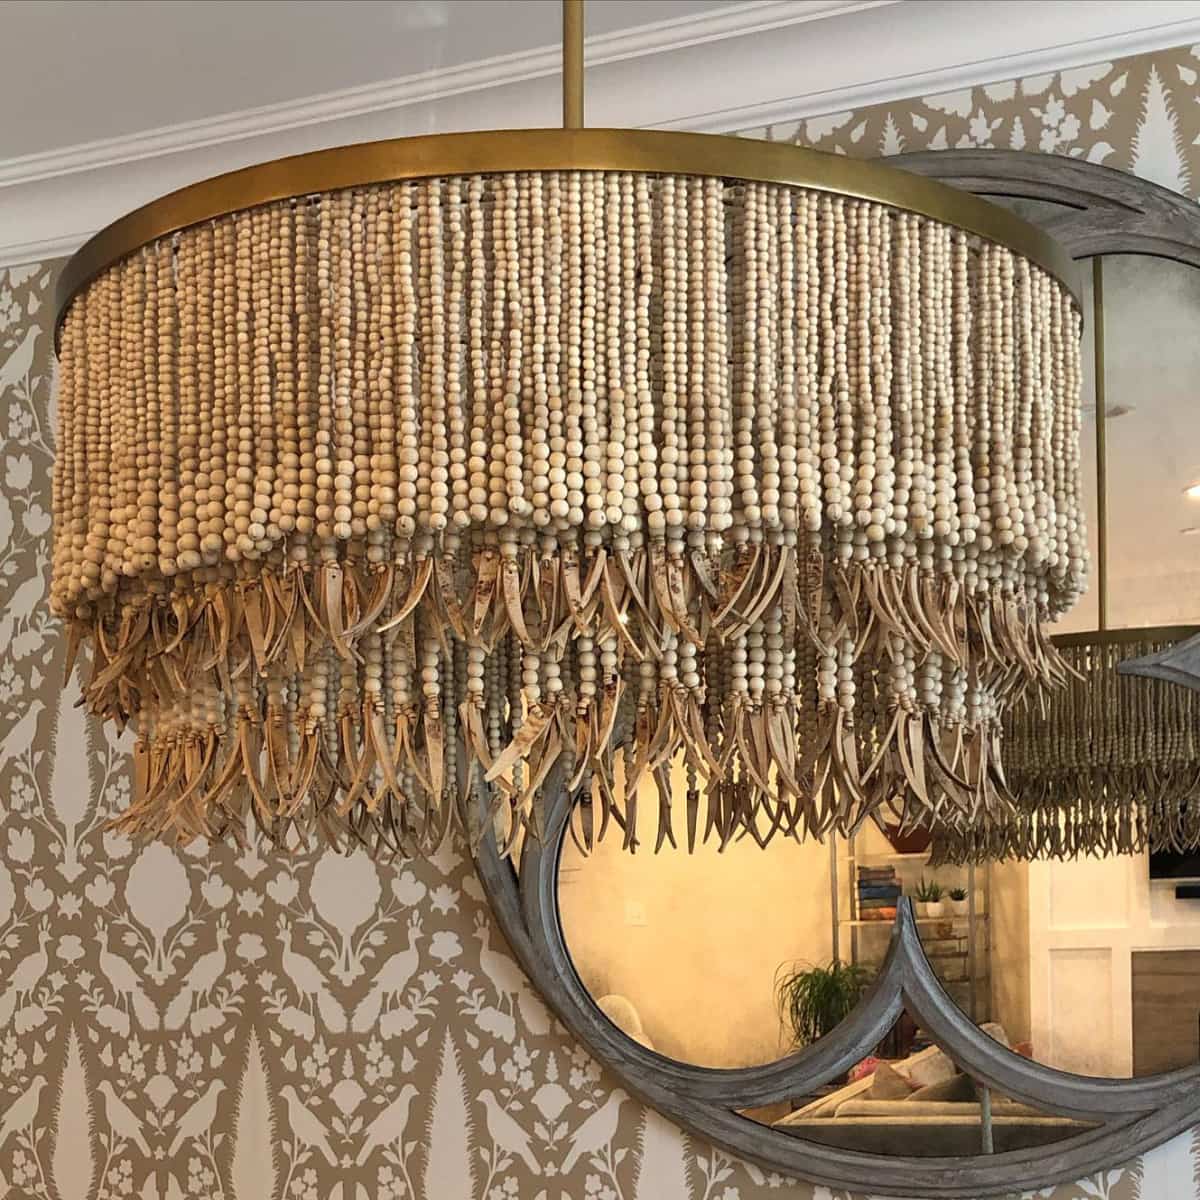 How To Choose The Right Light Bulb For, How Much To Put Up A Chandelier